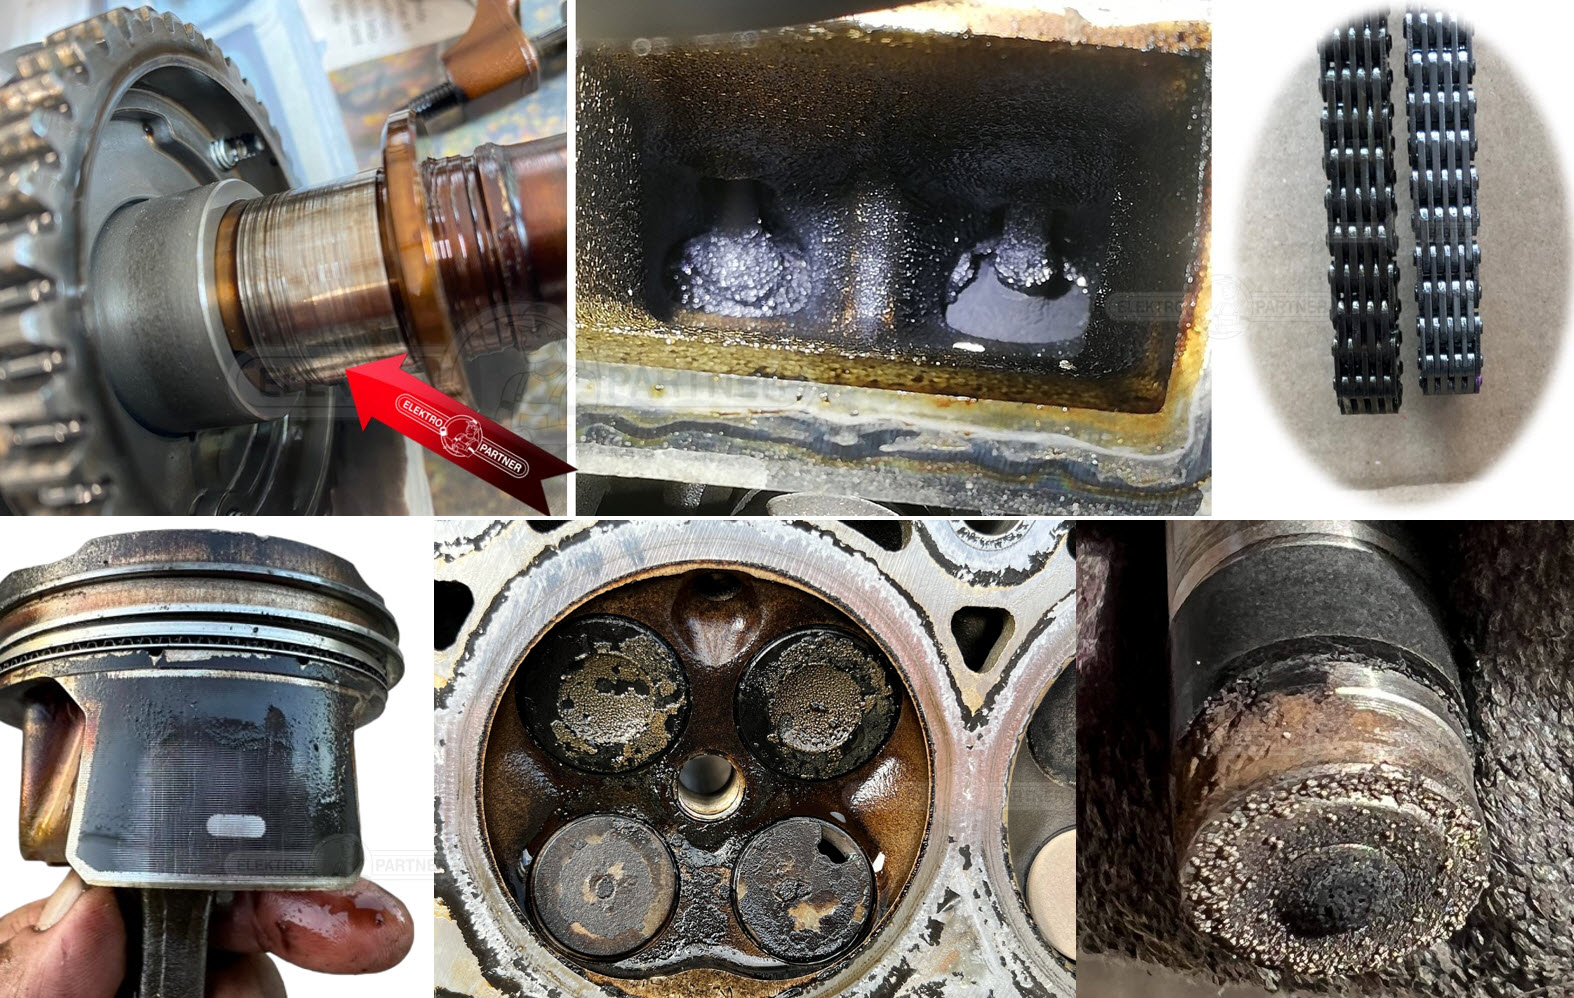 Diagnosing Piston Damage: An Intro for Those in Auto Mechanic Training